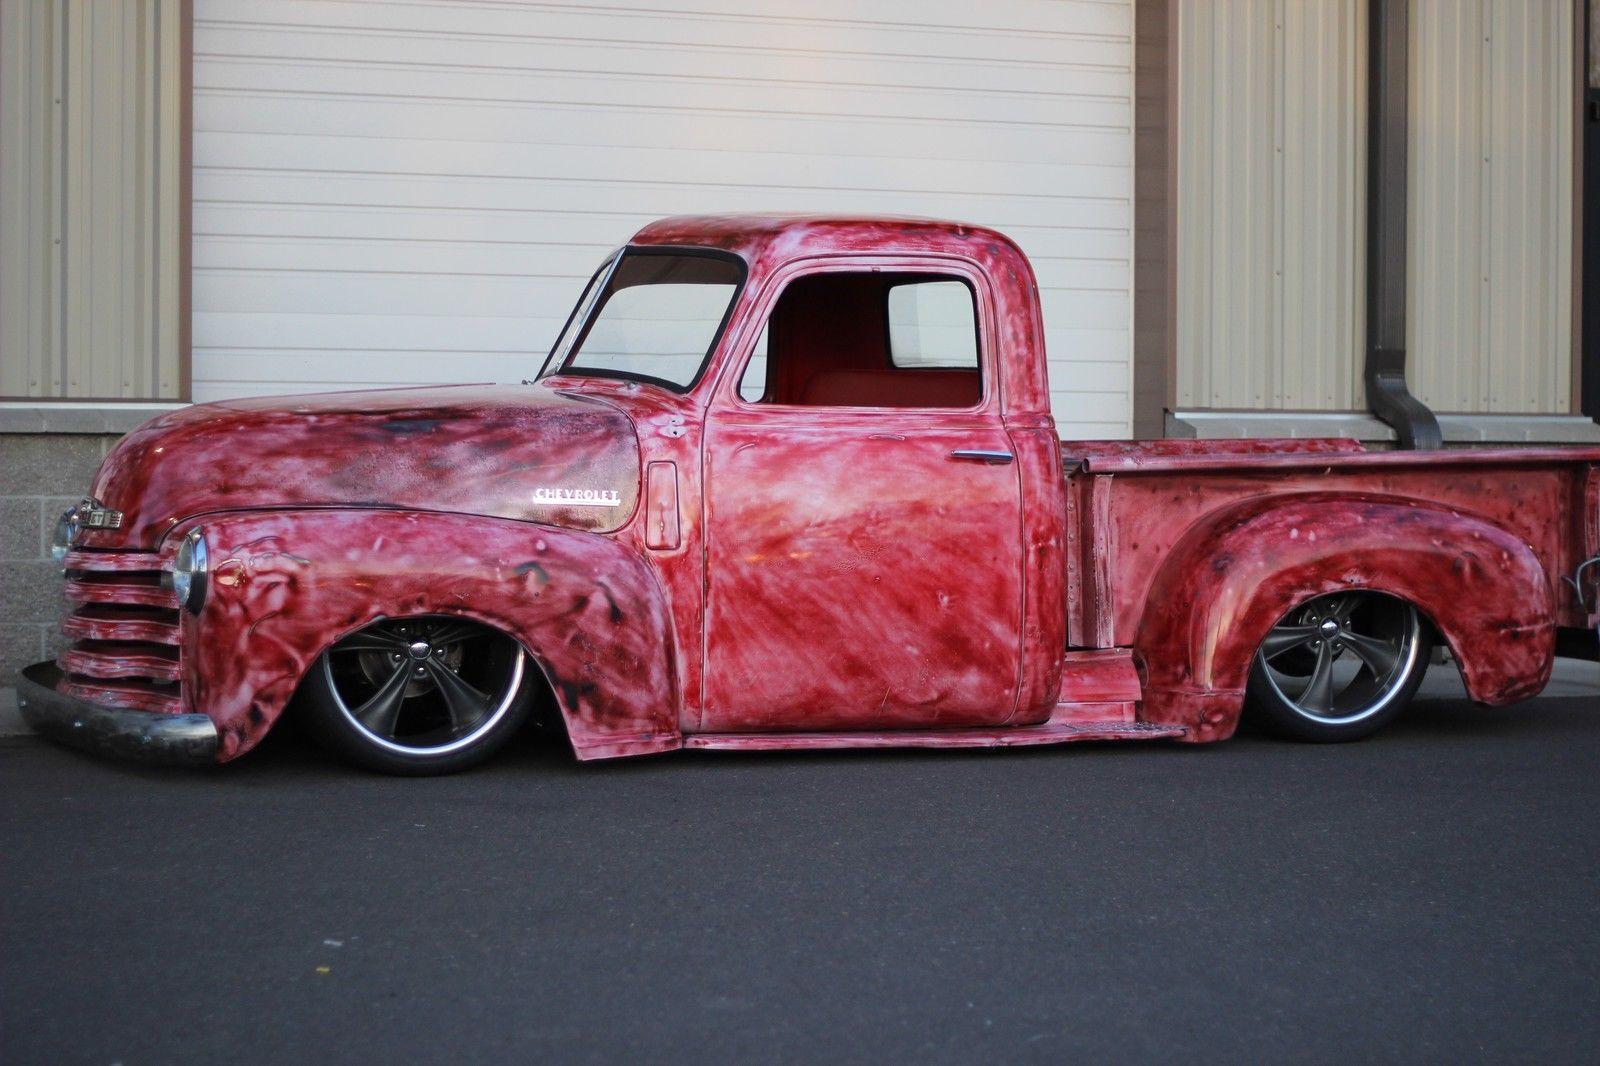 1950 Chevrolet 3100 "Big Red" This may be one of the coolest pati...